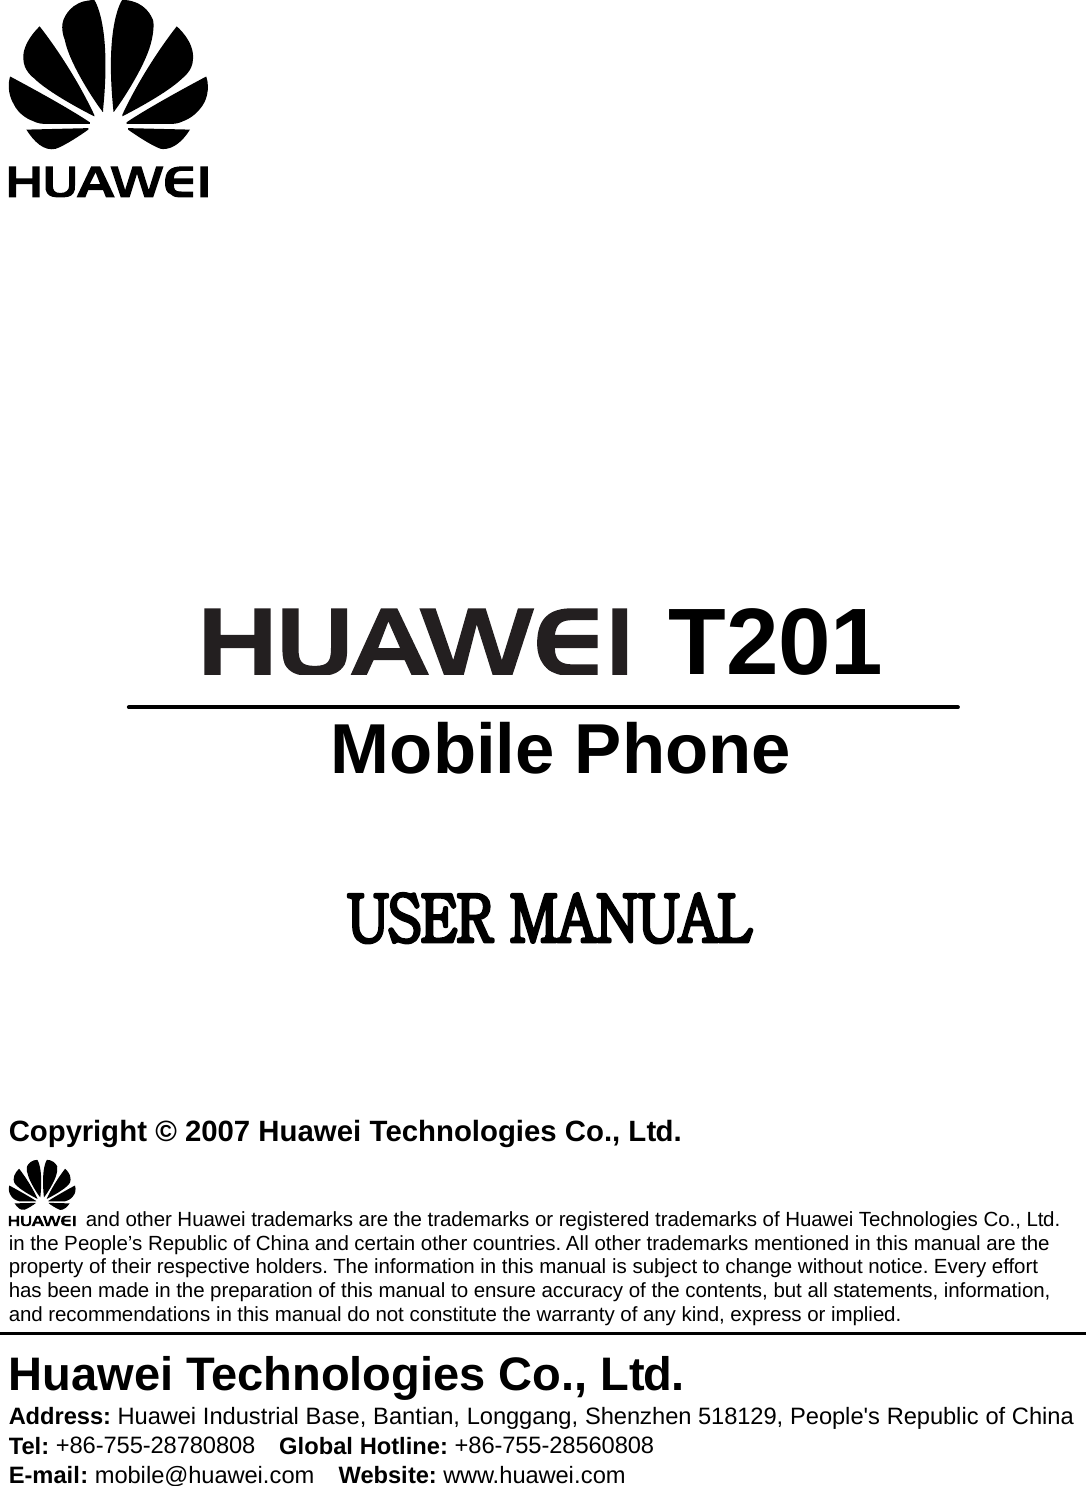           T201  Mobile Phone      Copyright © 2007 Huawei Technologies Co., Ltd.   and other Huawei trademarks are the trademarks or registered trademarks of Huawei Technologies Co., Ltd. in the People’s Republic of China and certain other countries. All other trademarks mentioned in this manual are the property of their respective holders. The information in this manual is subject to change without notice. Every effort has been made in the preparation of this manual to ensure accuracy of the contents, but all statements, information, and recommendations in this manual do not constitute the warranty of any kind, express or implied. Huawei Technologies Co., Ltd. Address: Huawei Industrial Base, Bantian, Longgang, Shenzhen 518129, People&apos;s Republic of China Tel: +86-755-28780808    Global Hotline: +86-755-28560808 E-mail: mobile@huawei.com    Website: www.huawei.com 